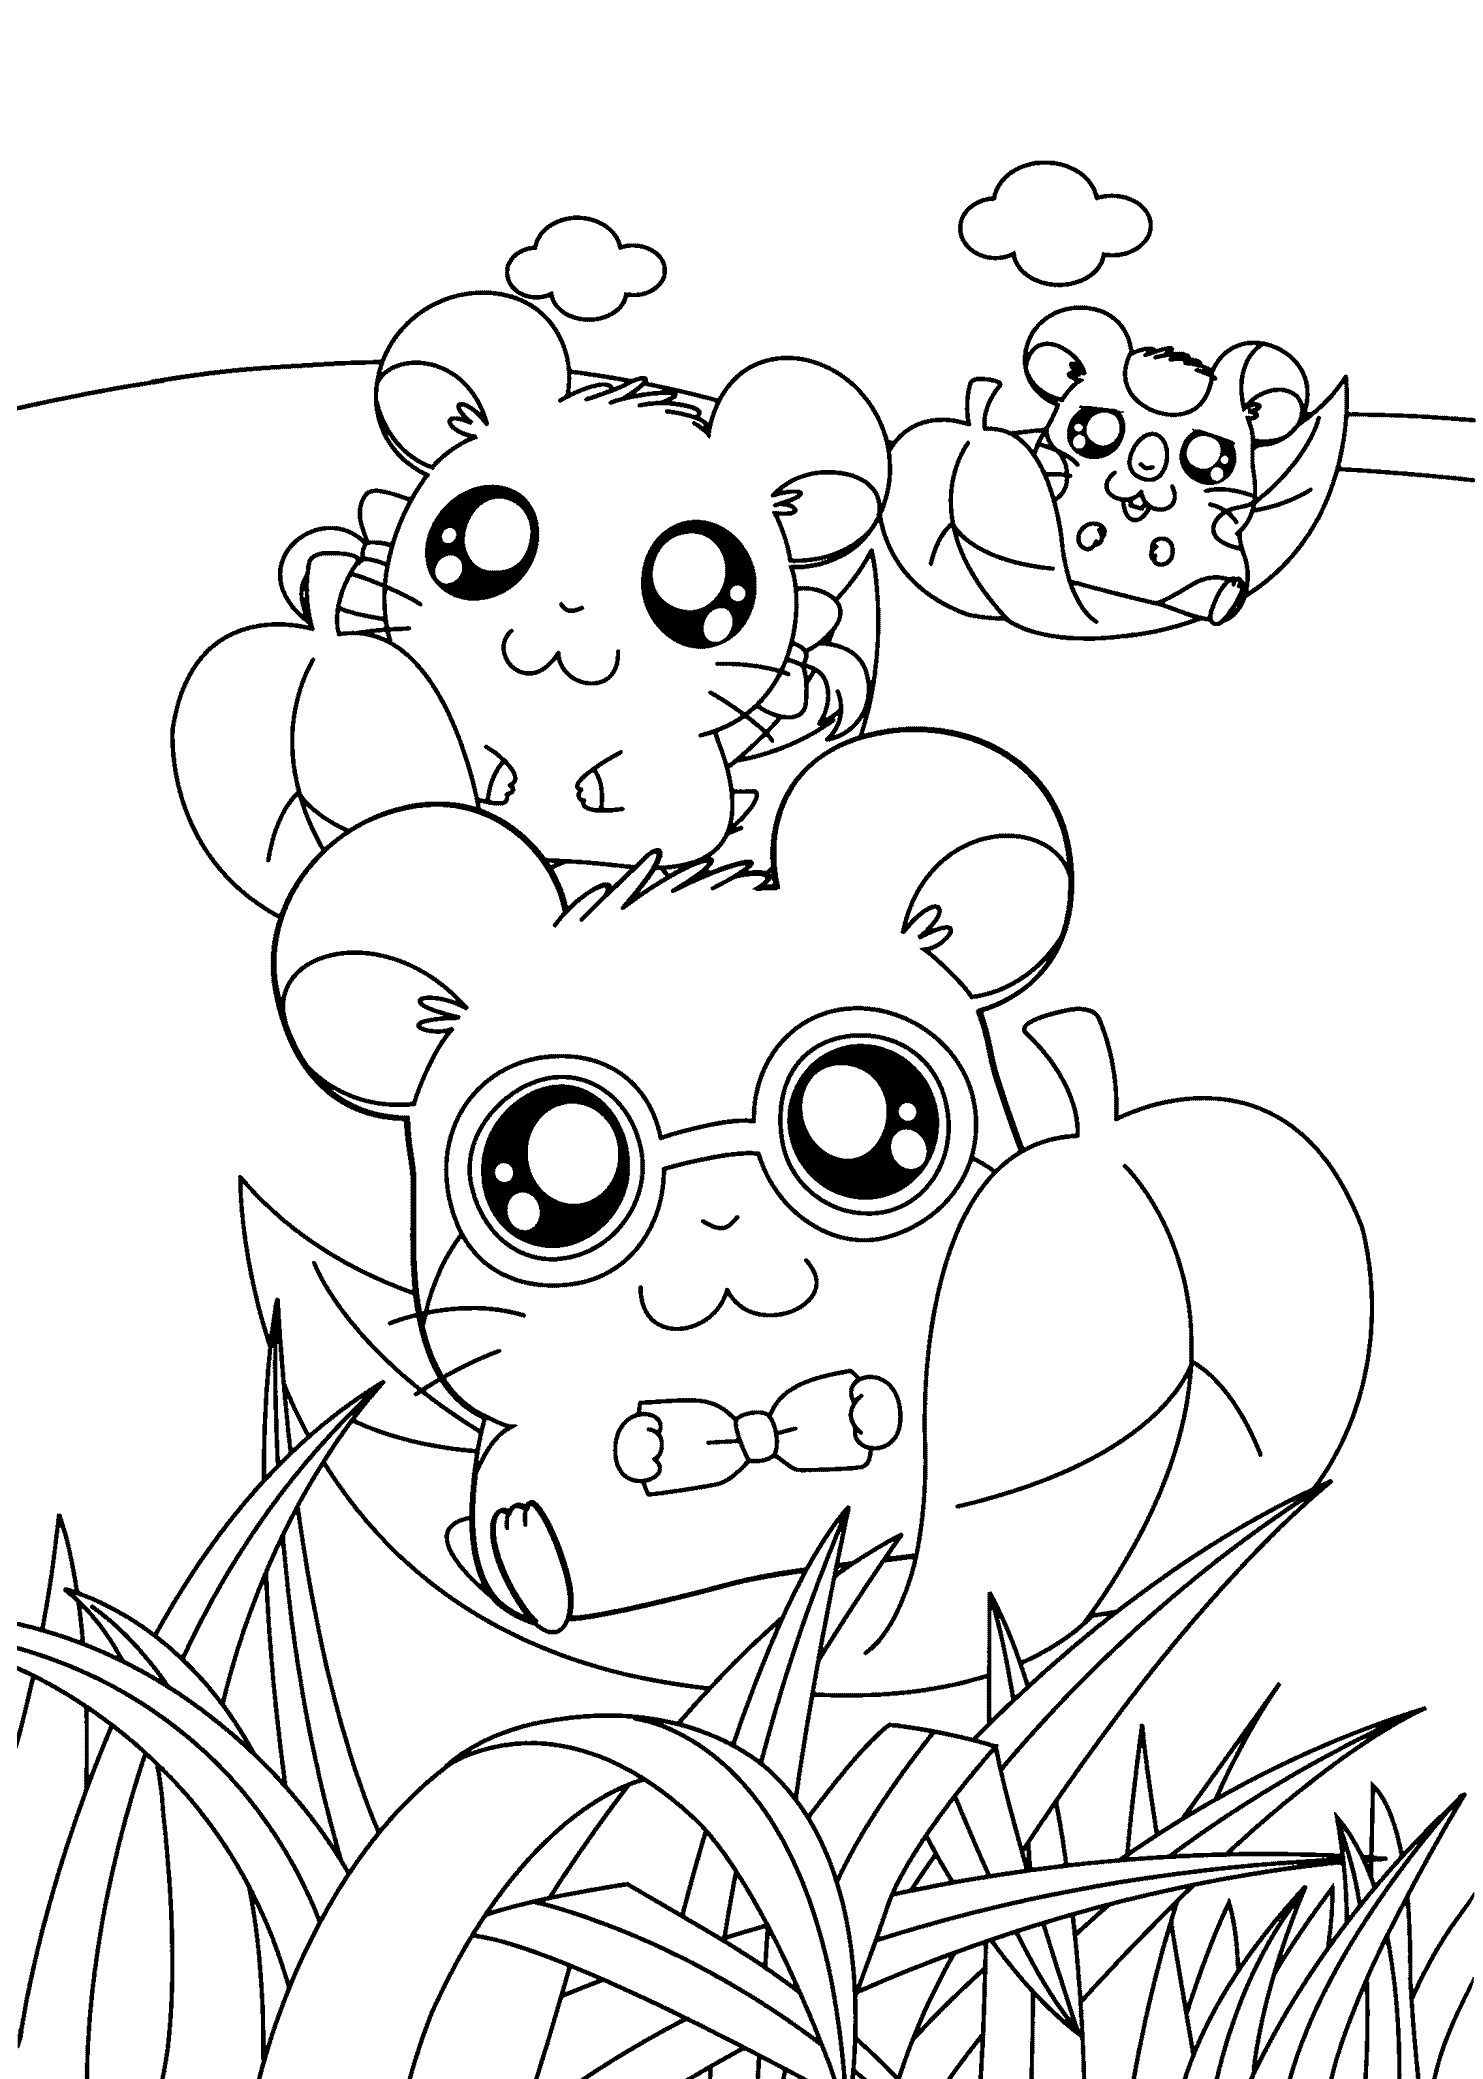 Manga Coloring Pages For Kids
 Hamtaro funny anime coloring pages for kids printable